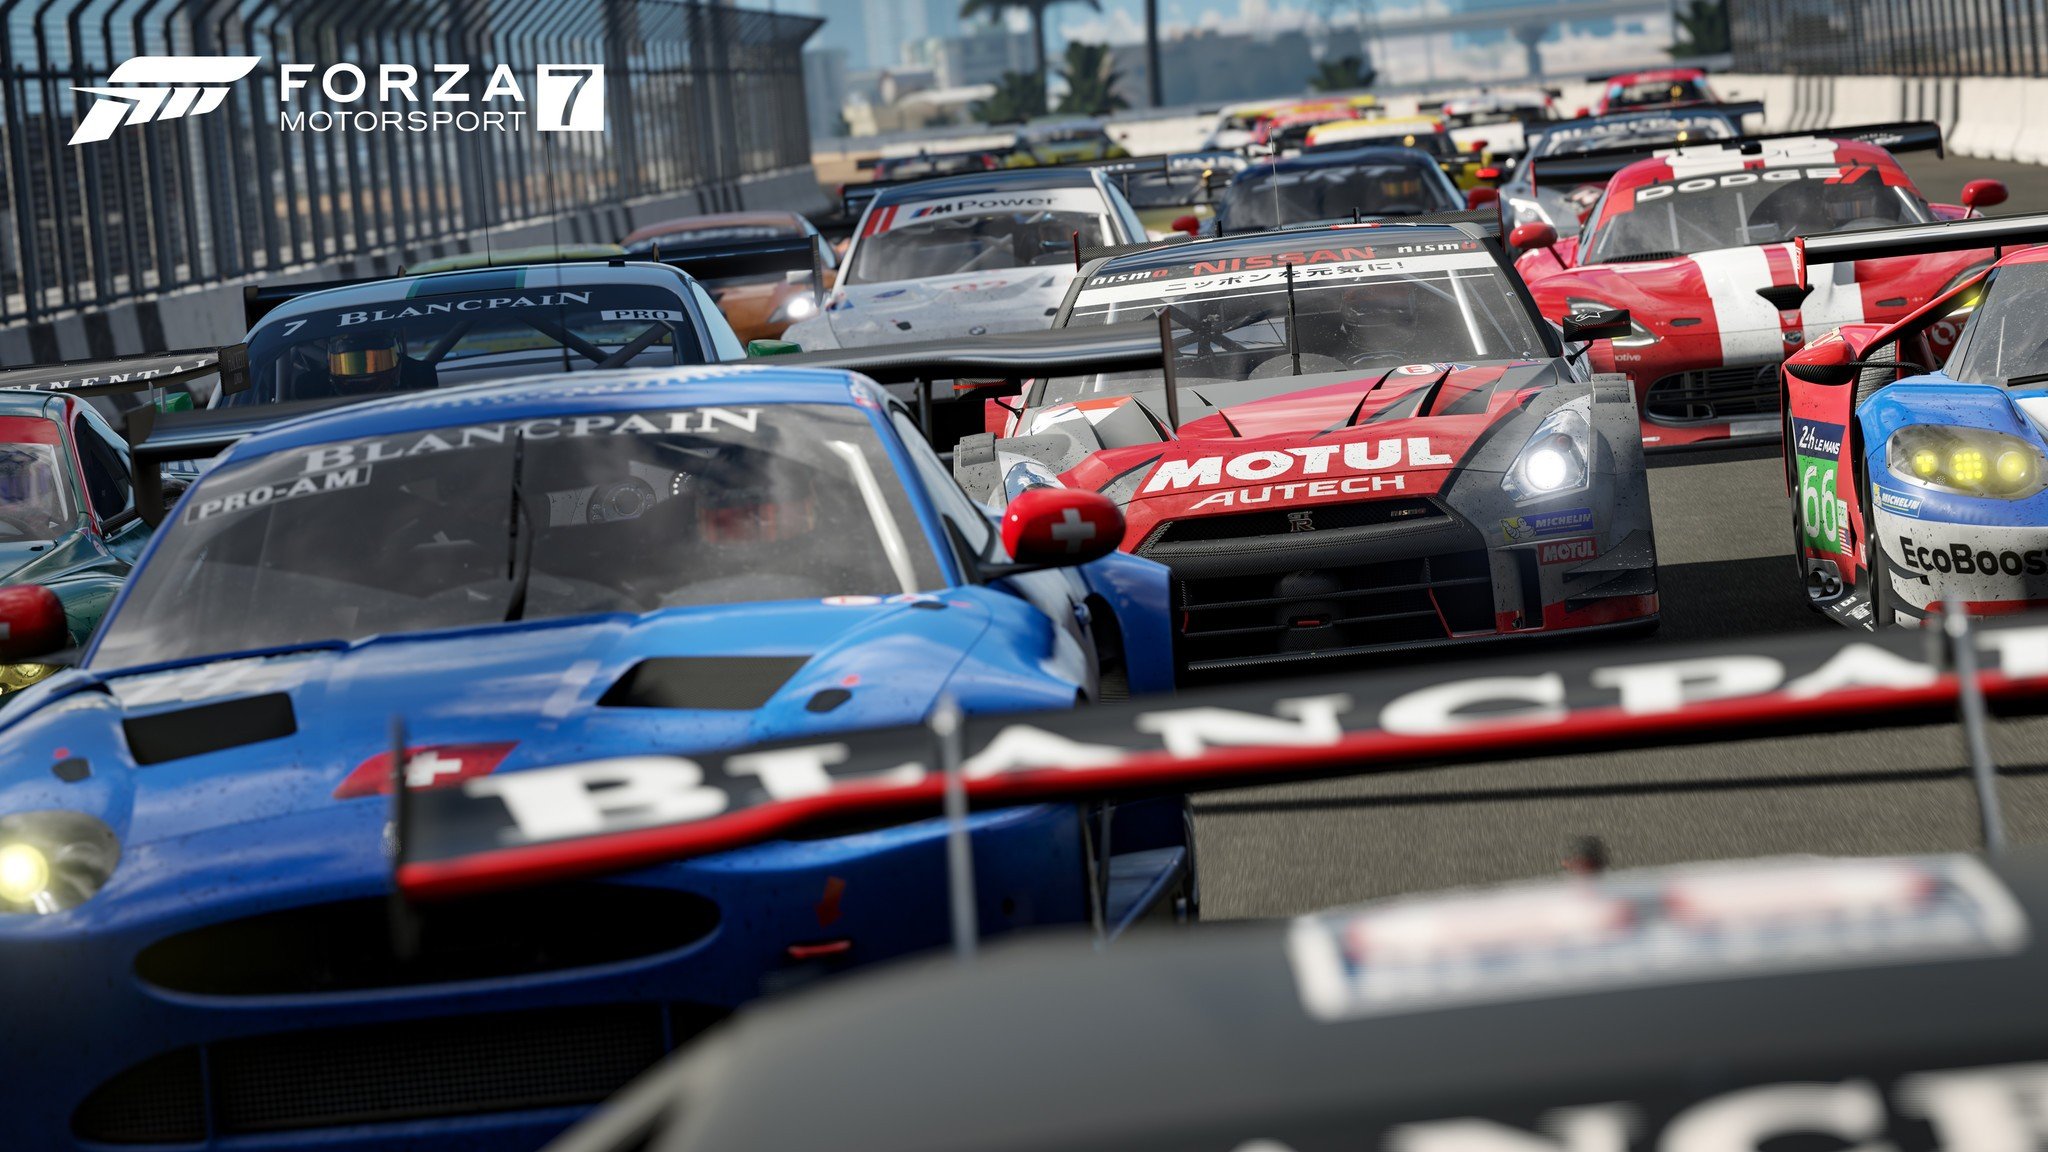 Forza Motorsport PC requirements